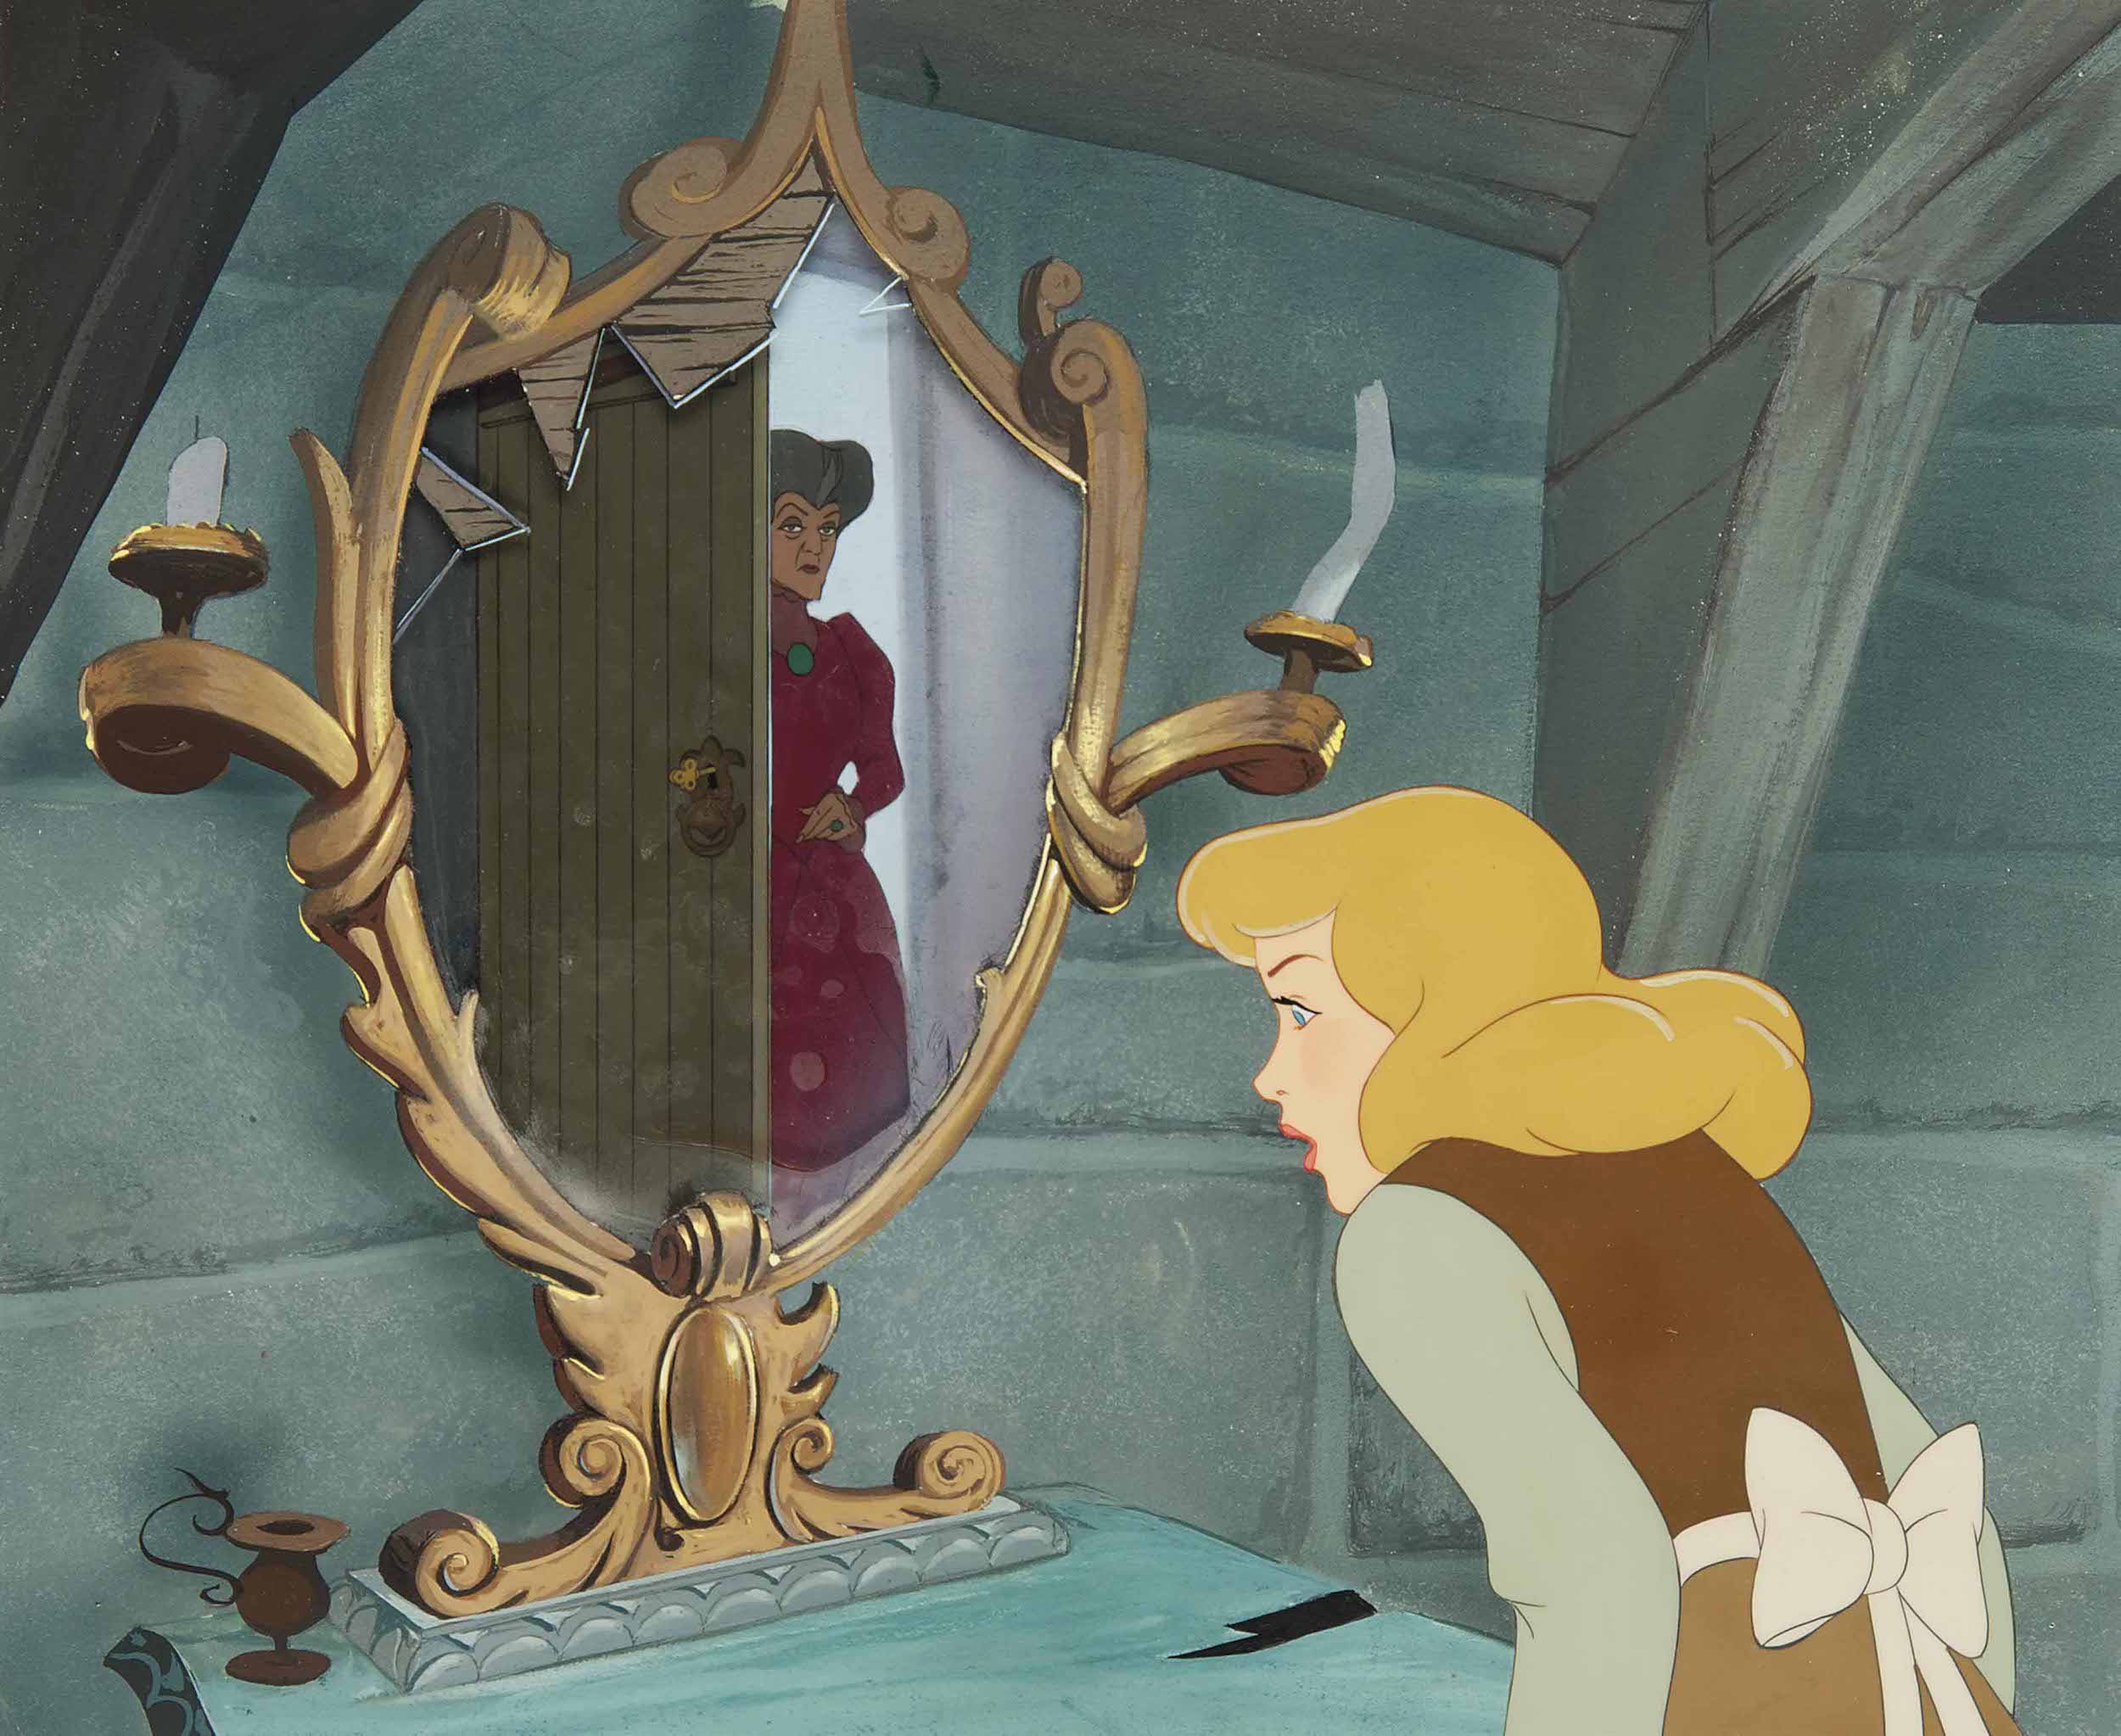 Cinderella looking into a mirror and seeing her stepmother in the reflection.